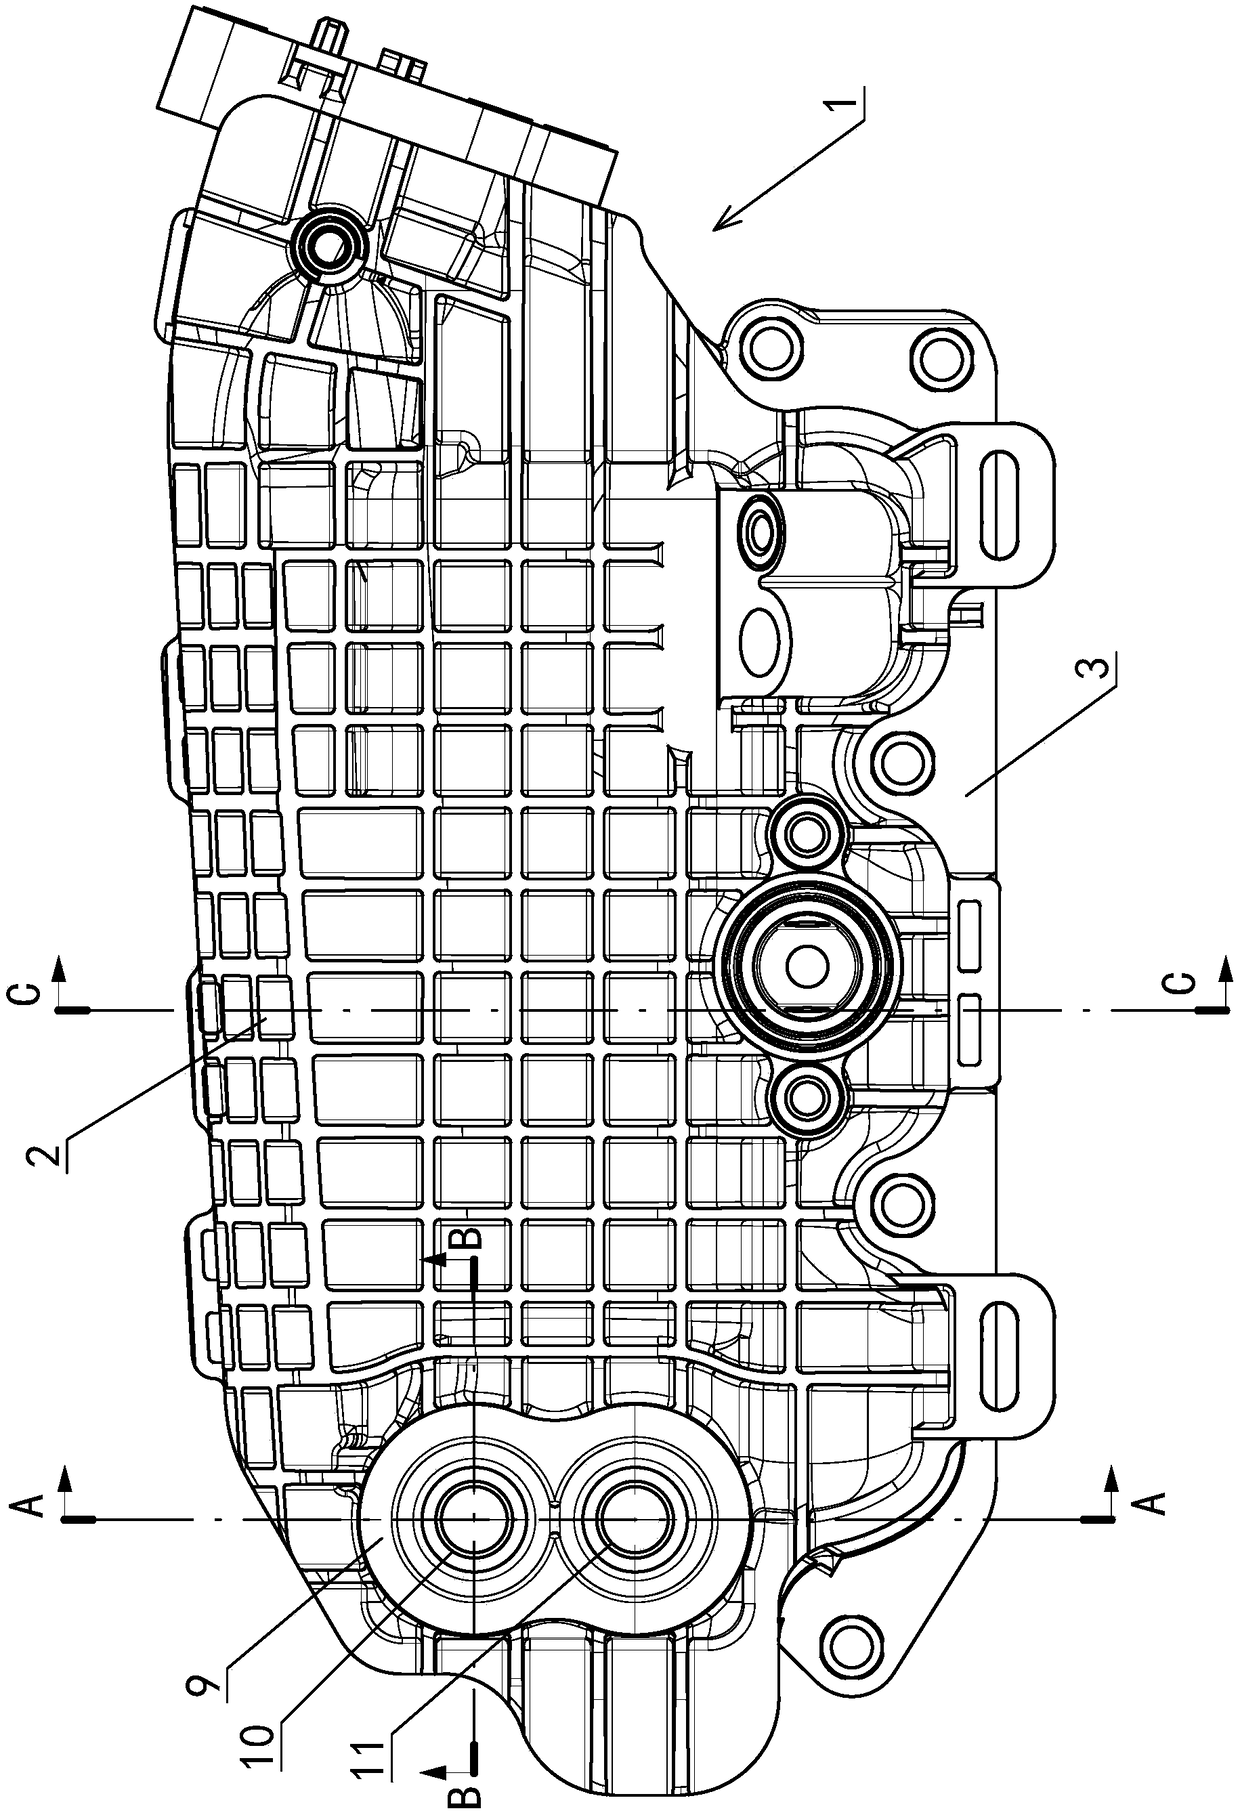 An engine intake manifold with a built-in cooler and high sealing performance